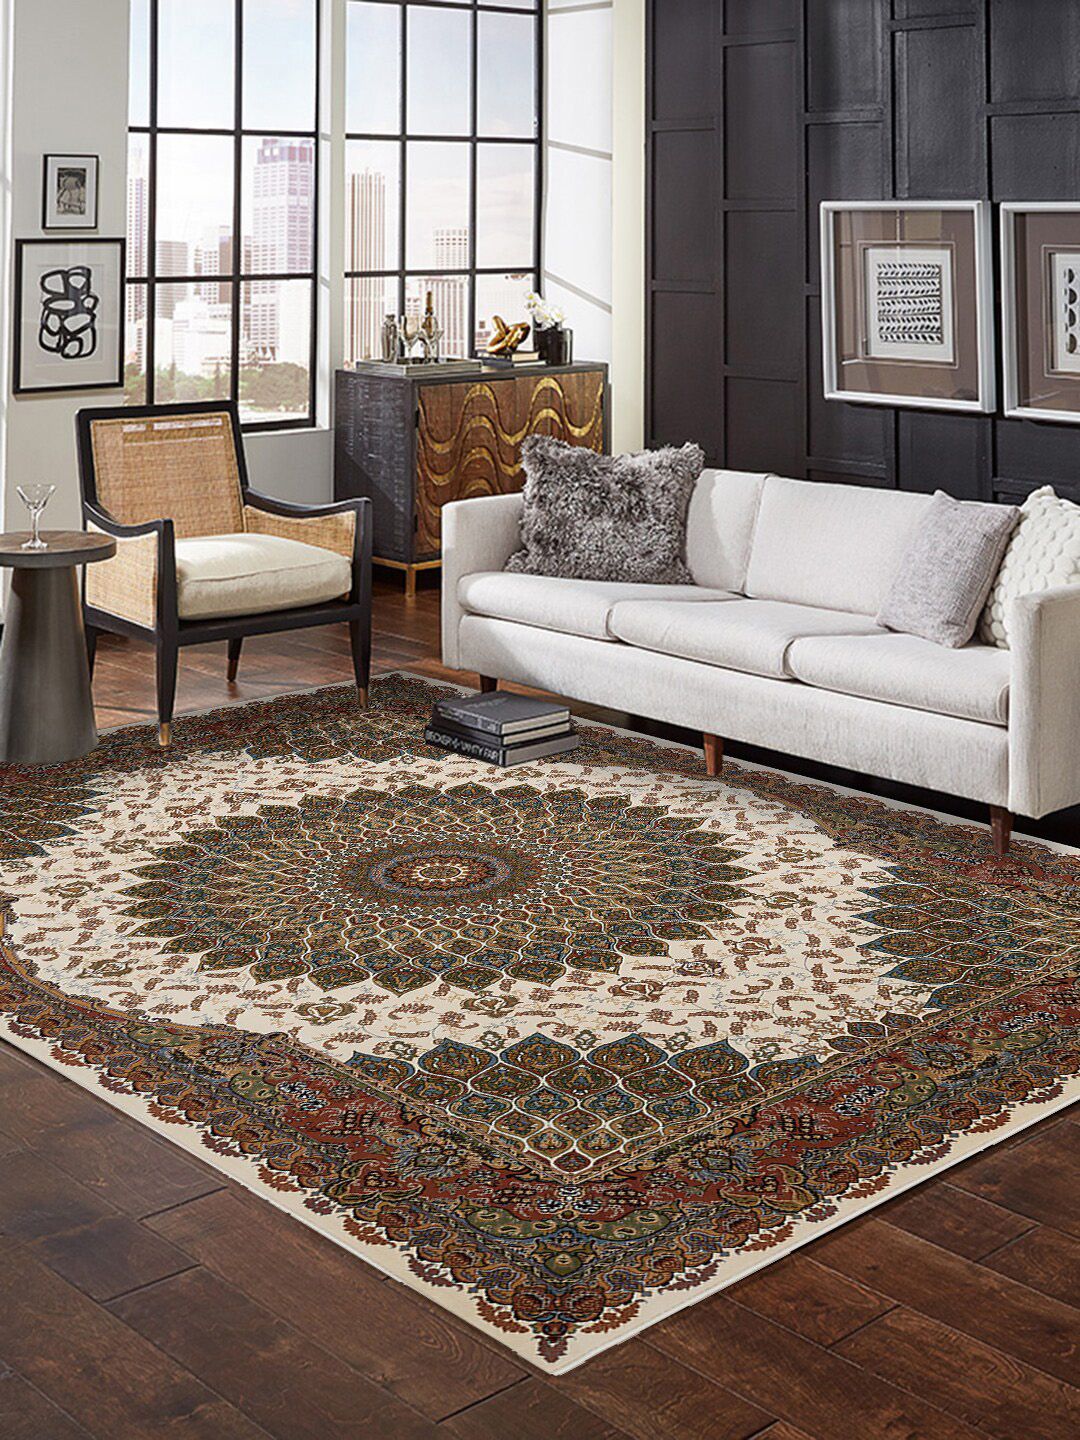 DDecor Brown & Cream Colored Ethnic Motifs Traditional Carpet Price in India